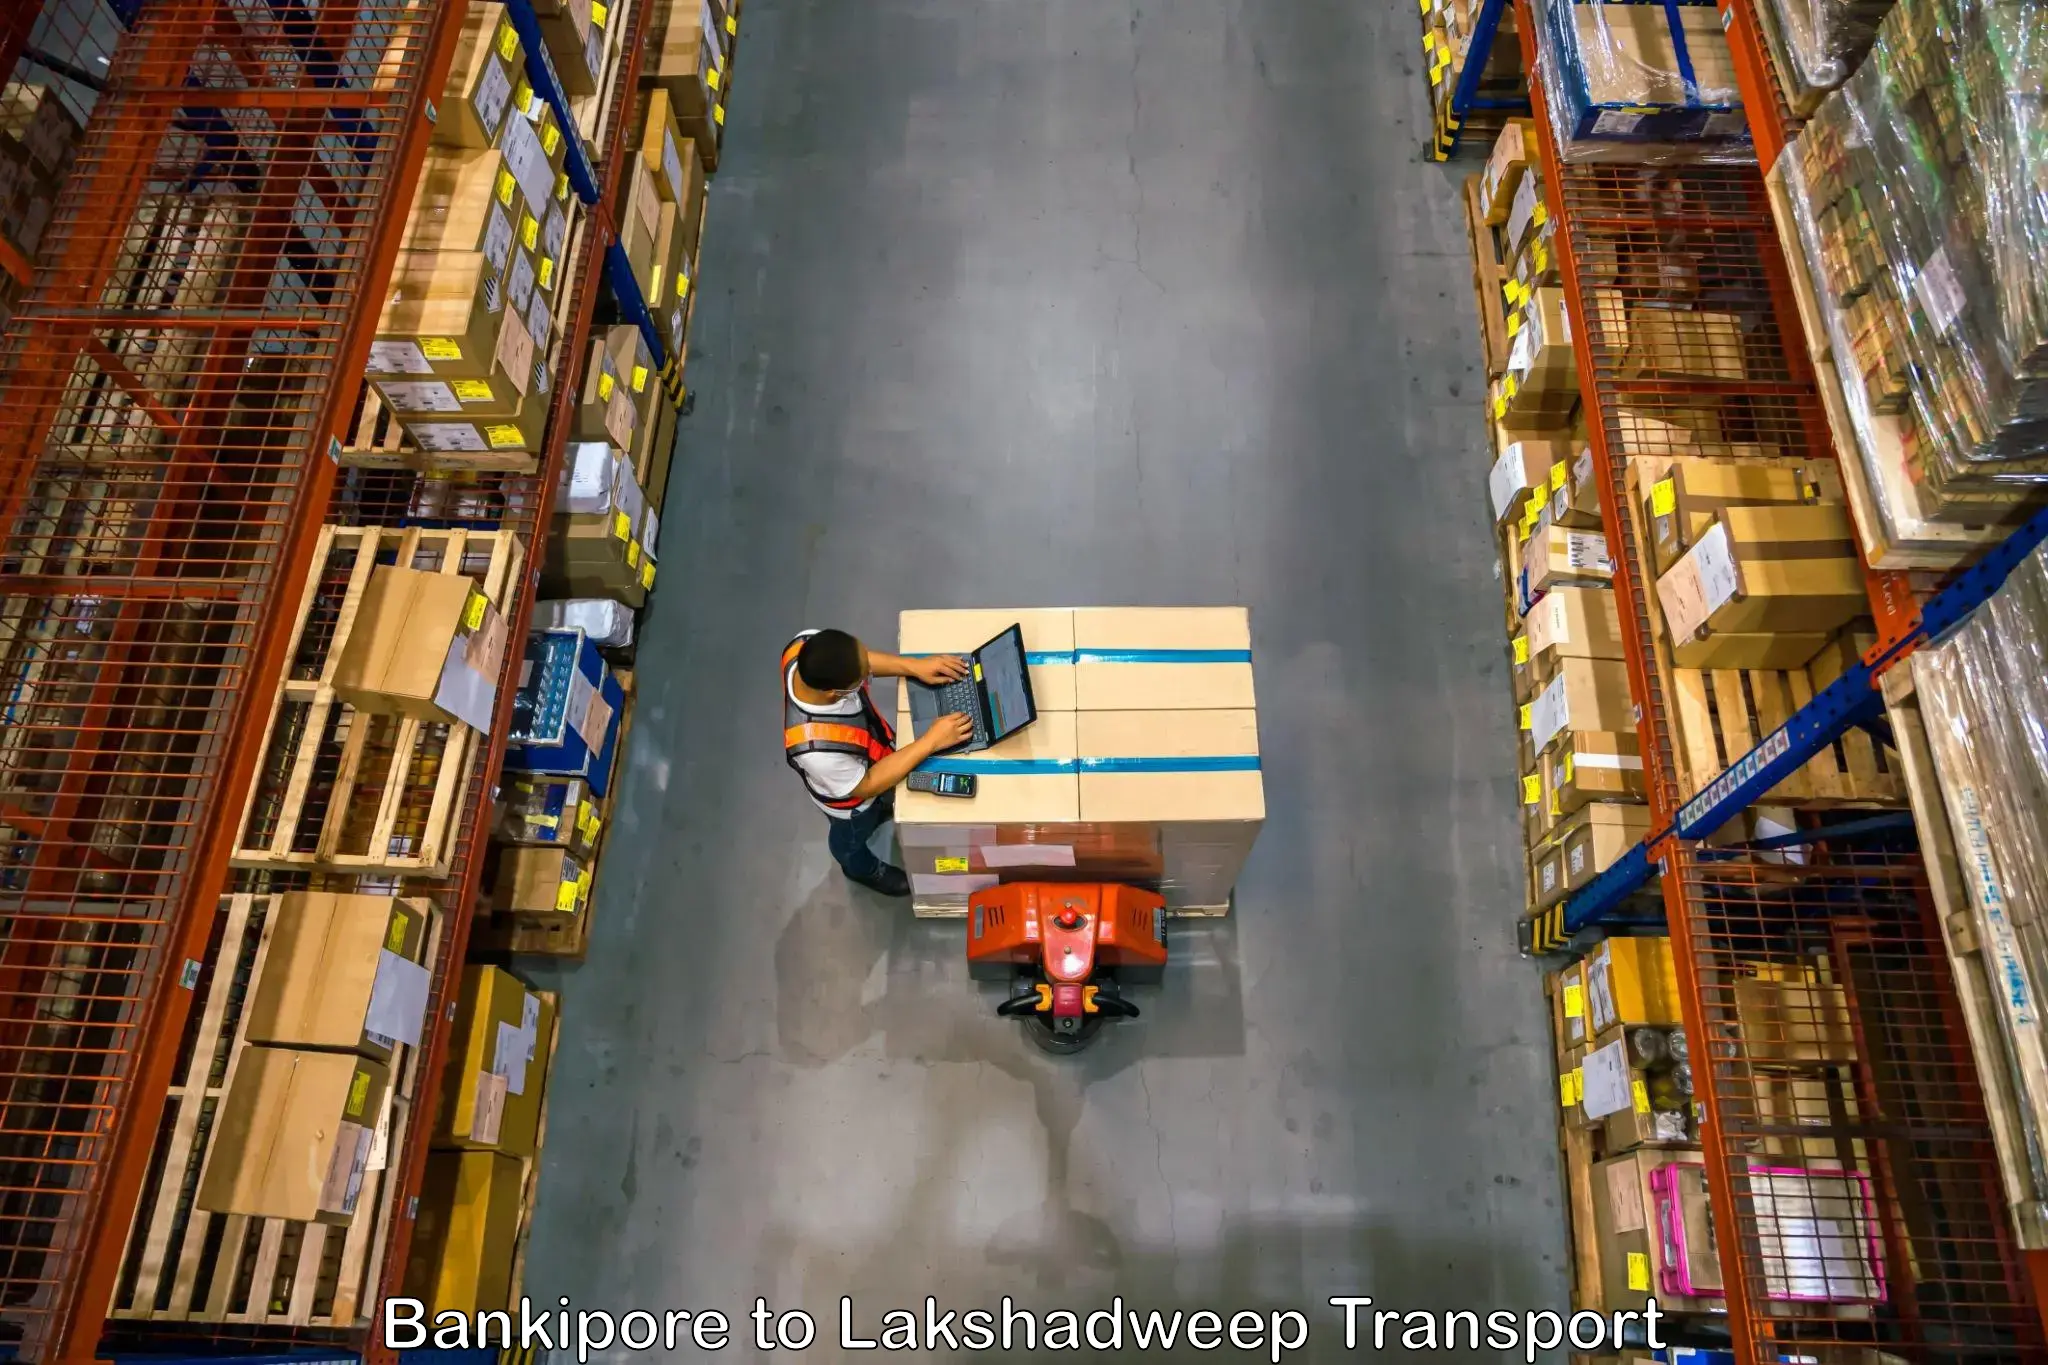 Goods delivery service Bankipore to Lakshadweep